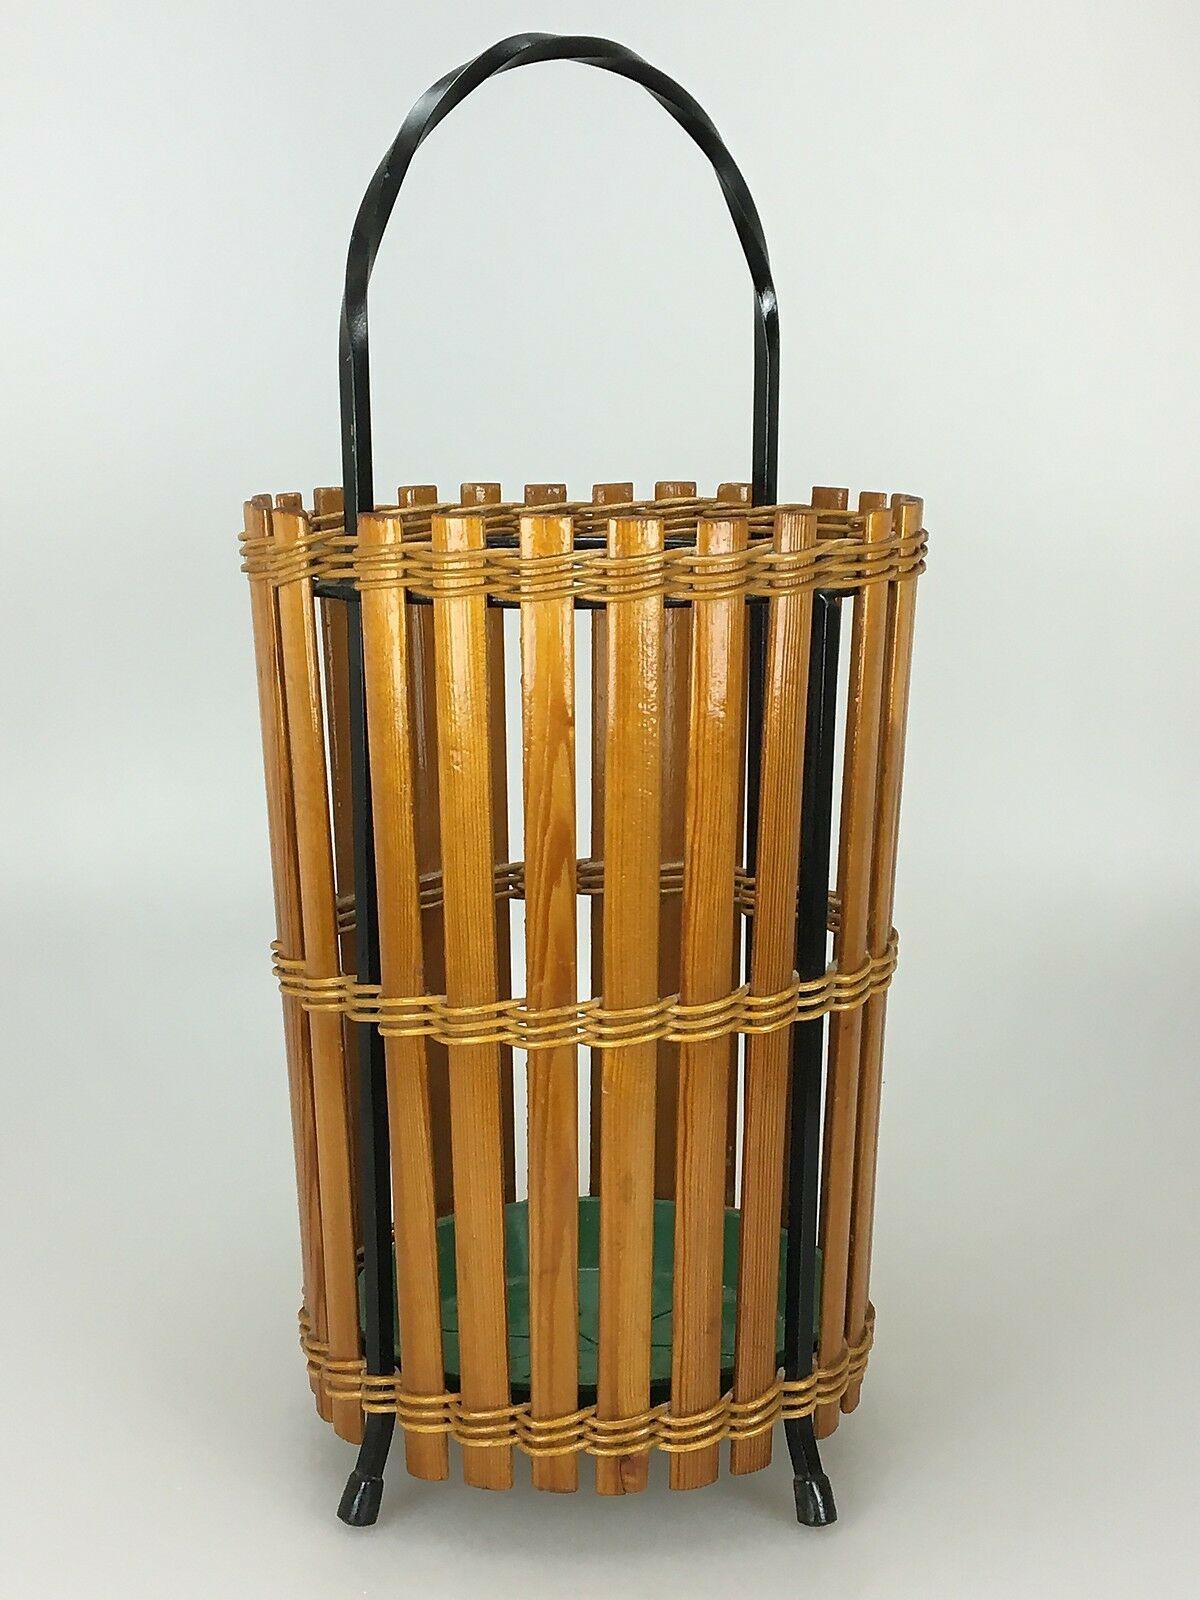 60s 70s Umbrella stand umbrella holder wood metal mid-century Design 60s

Object: umbrella stand

Manufacturer:

Condition: good

Age: around 1960-1970

Dimensions:

Diameter = 27cm
Height = 56cm

Other notes:

The pictures serve as